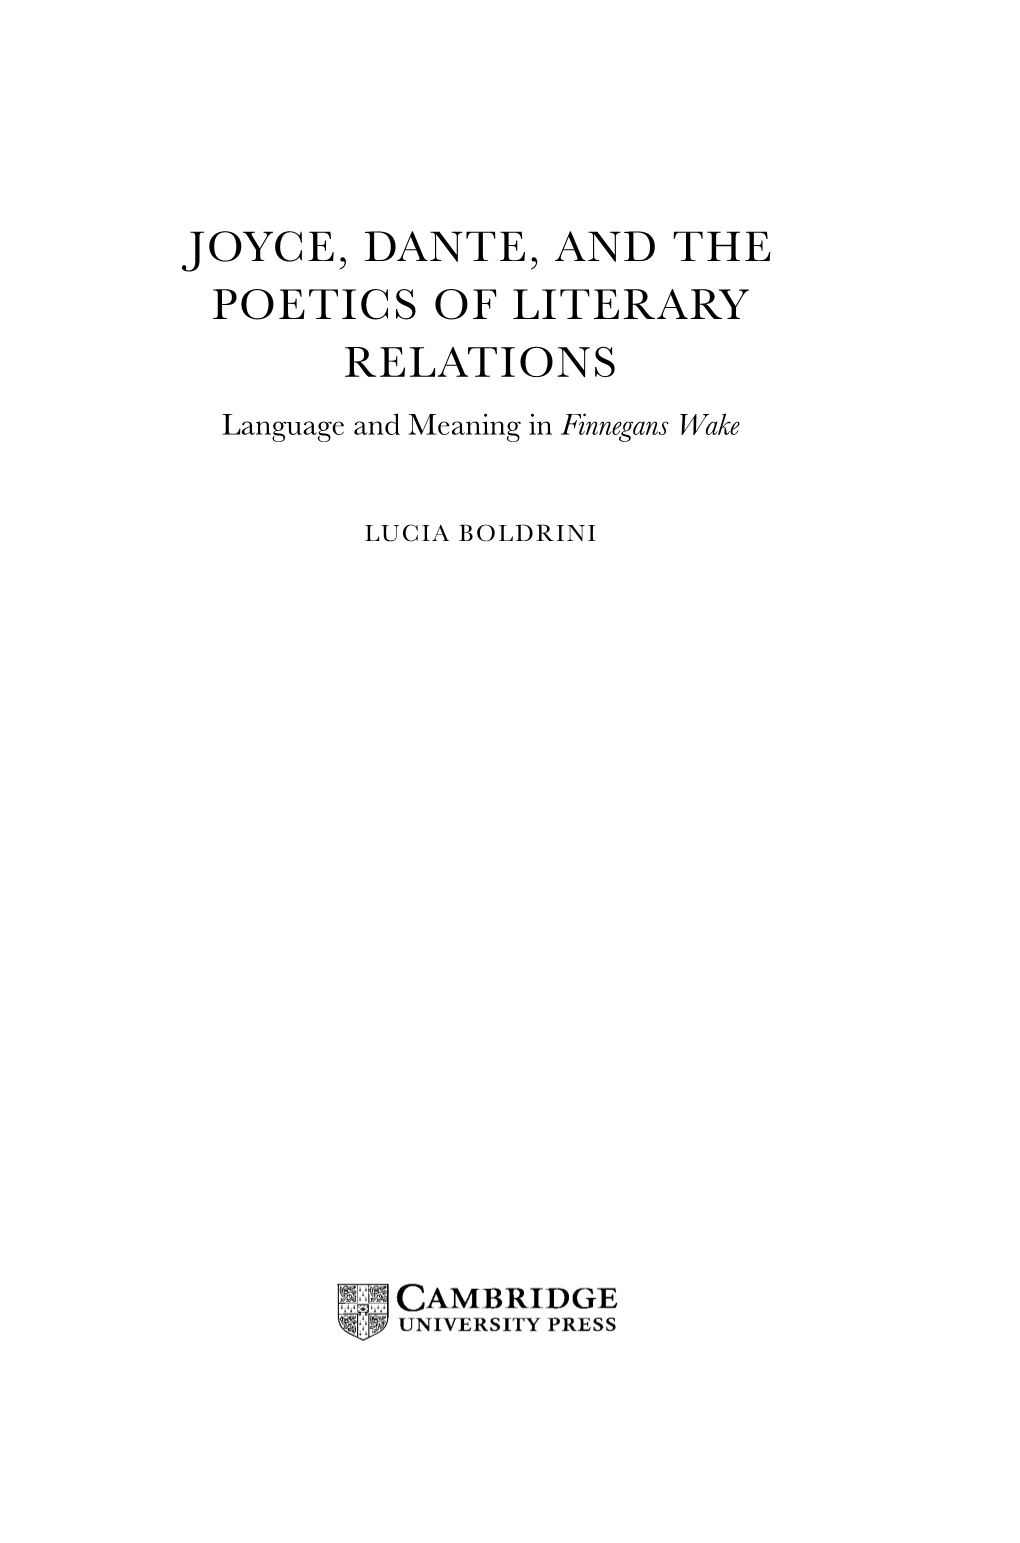 JOYCE, DANTE, and the POETICS of LITERARY RELATIONS Language and Meaning in Finnegans Wake